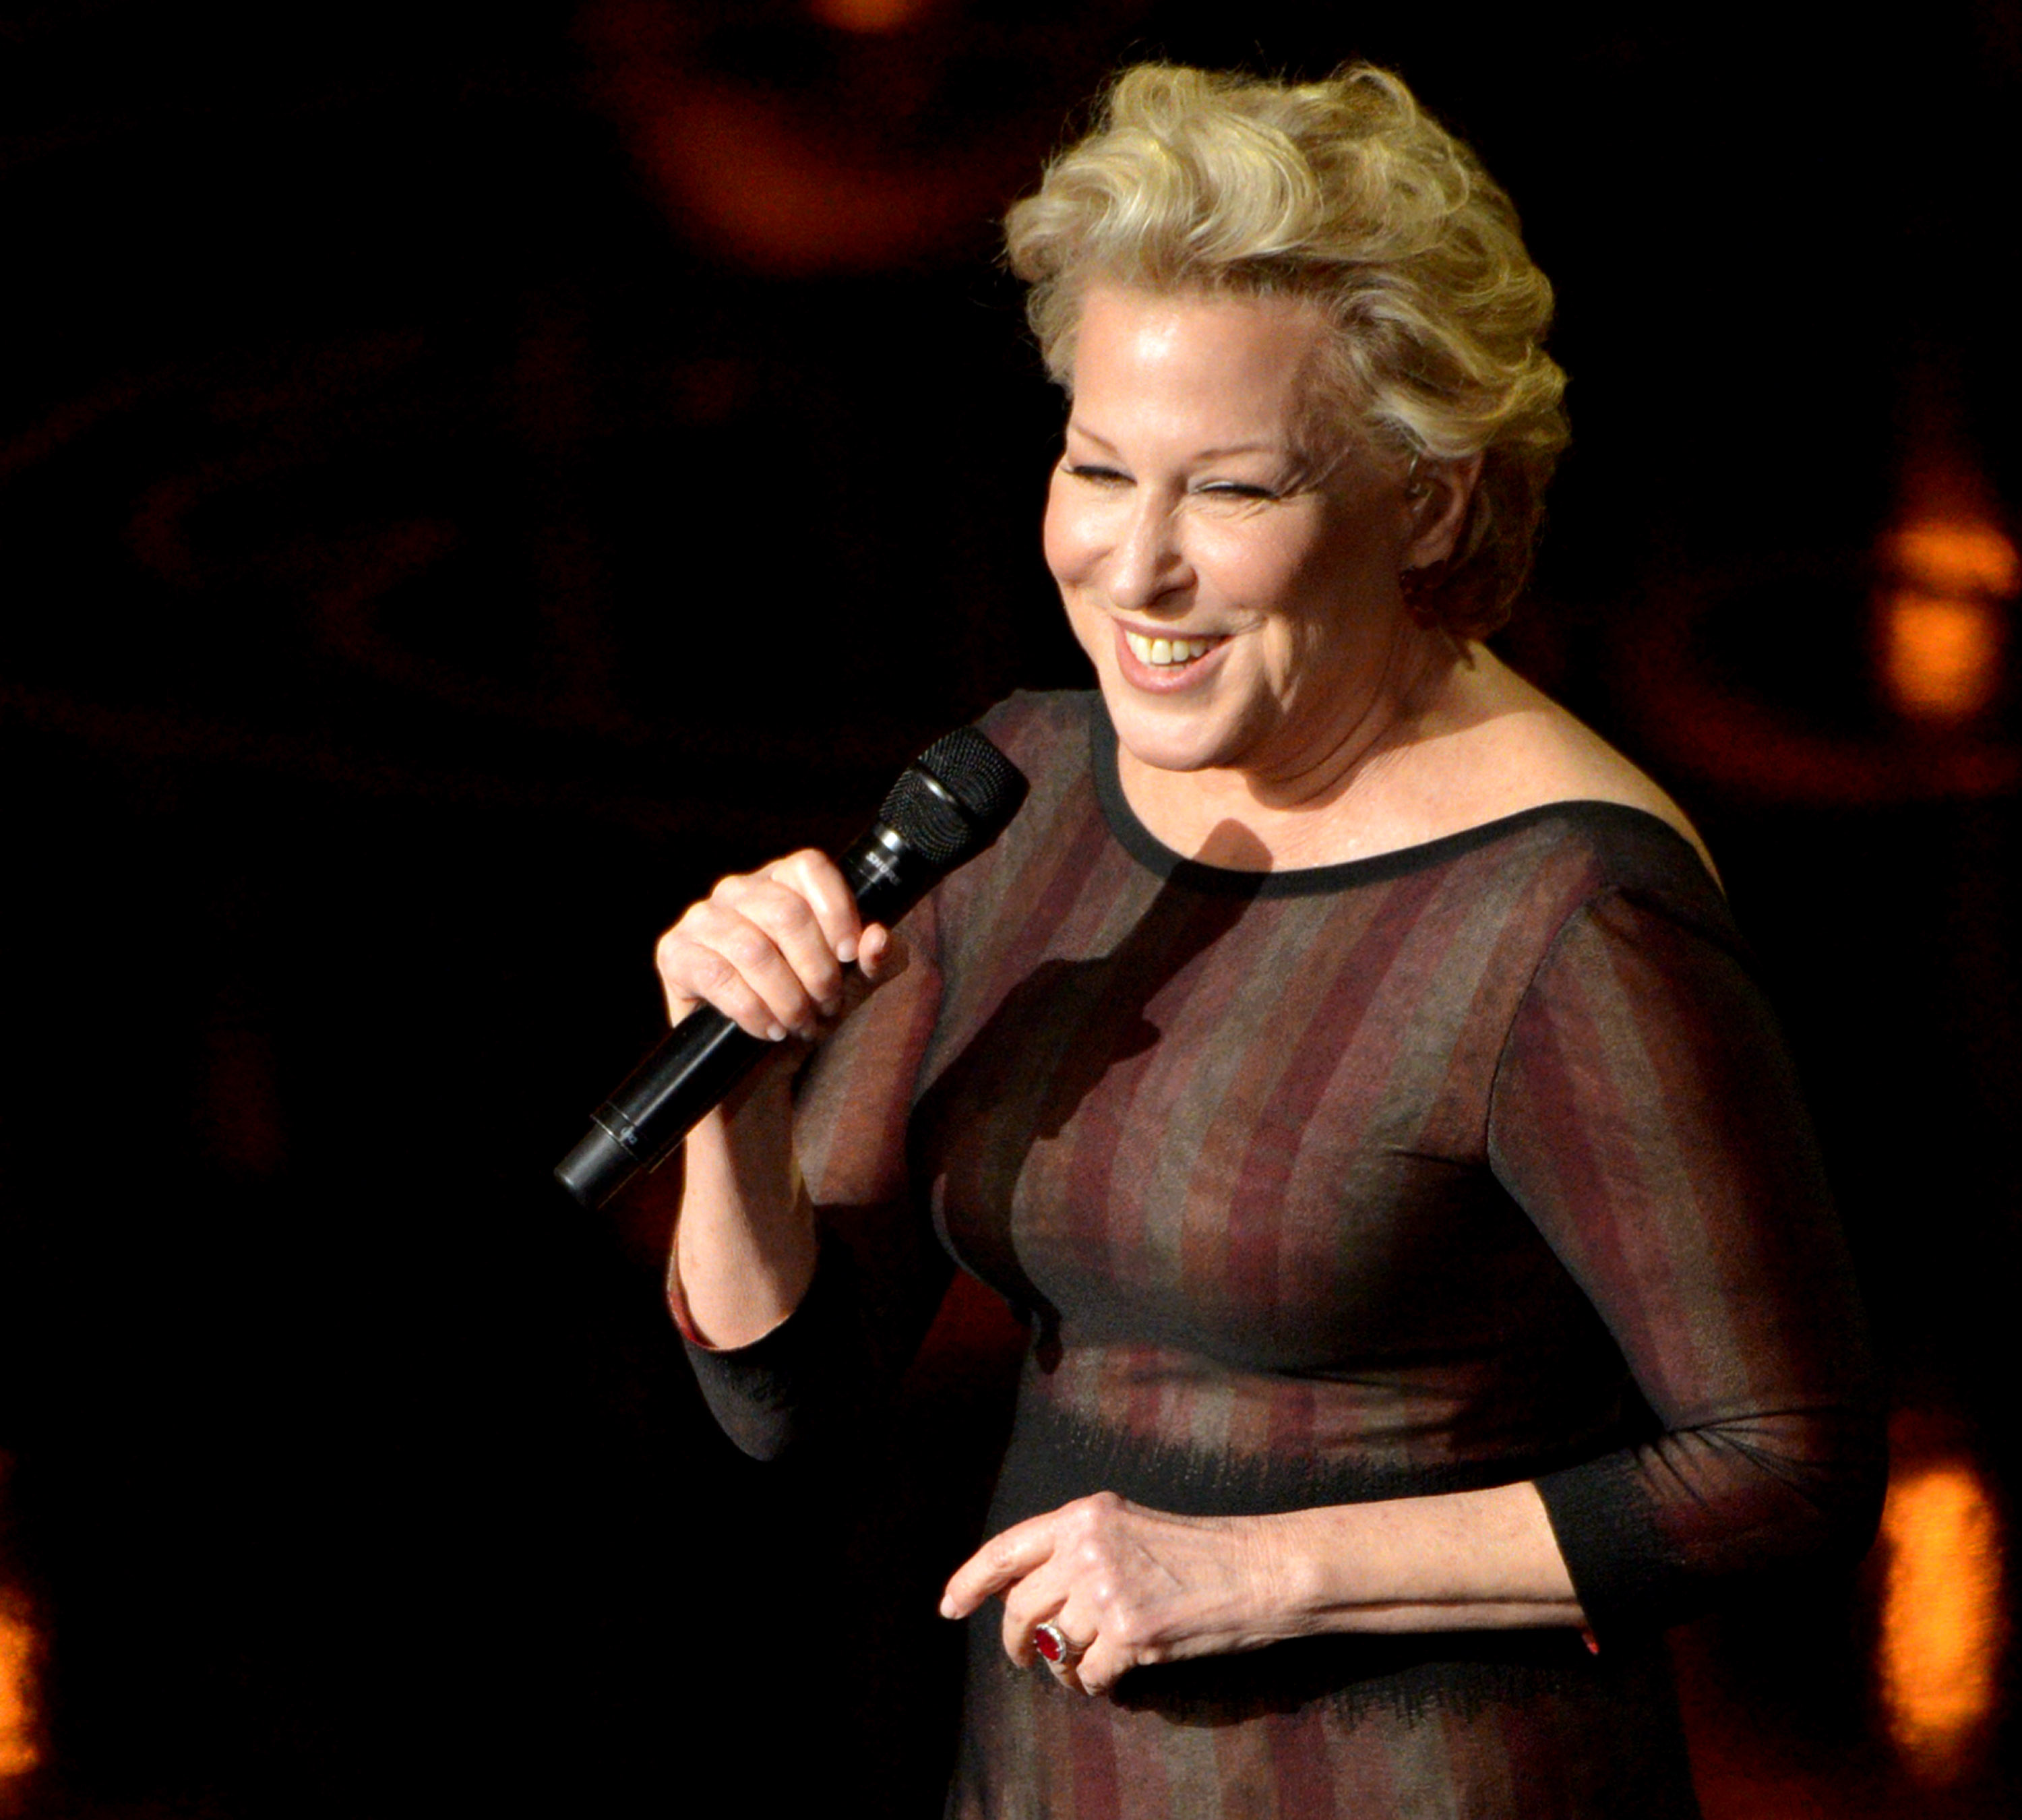 After eight years, Bette Midler released her first studio album "I...